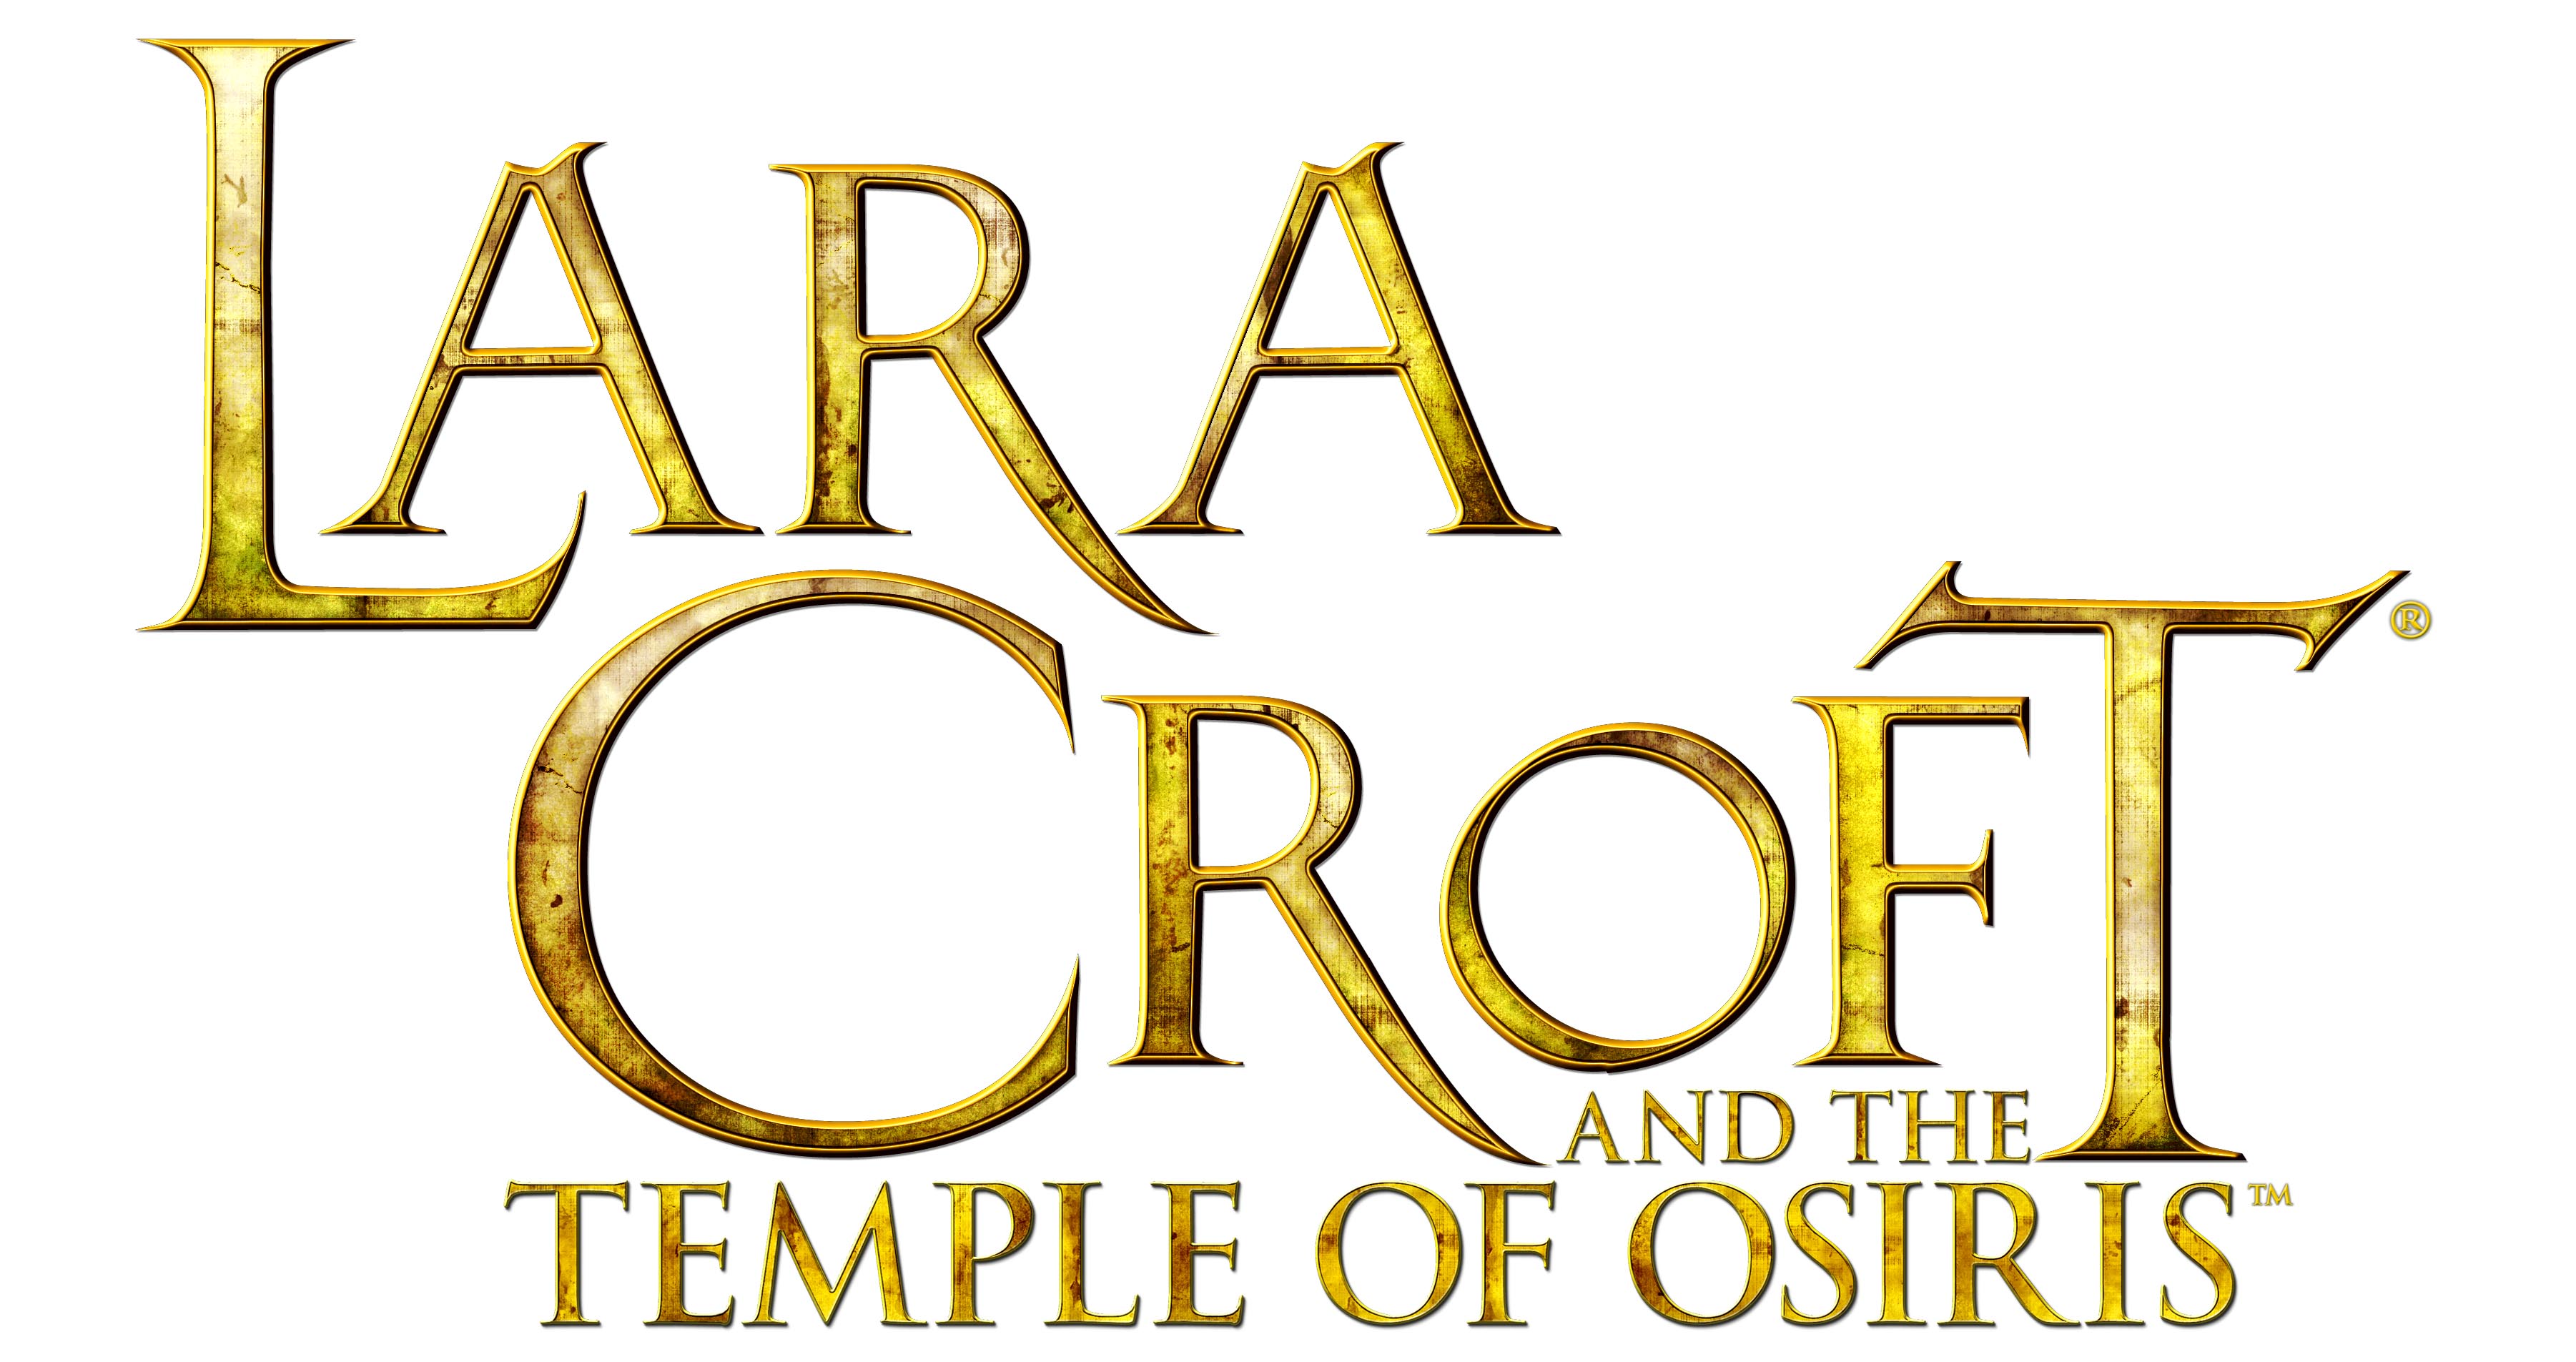 Lara Croft and the Temple of Osiris available now for download